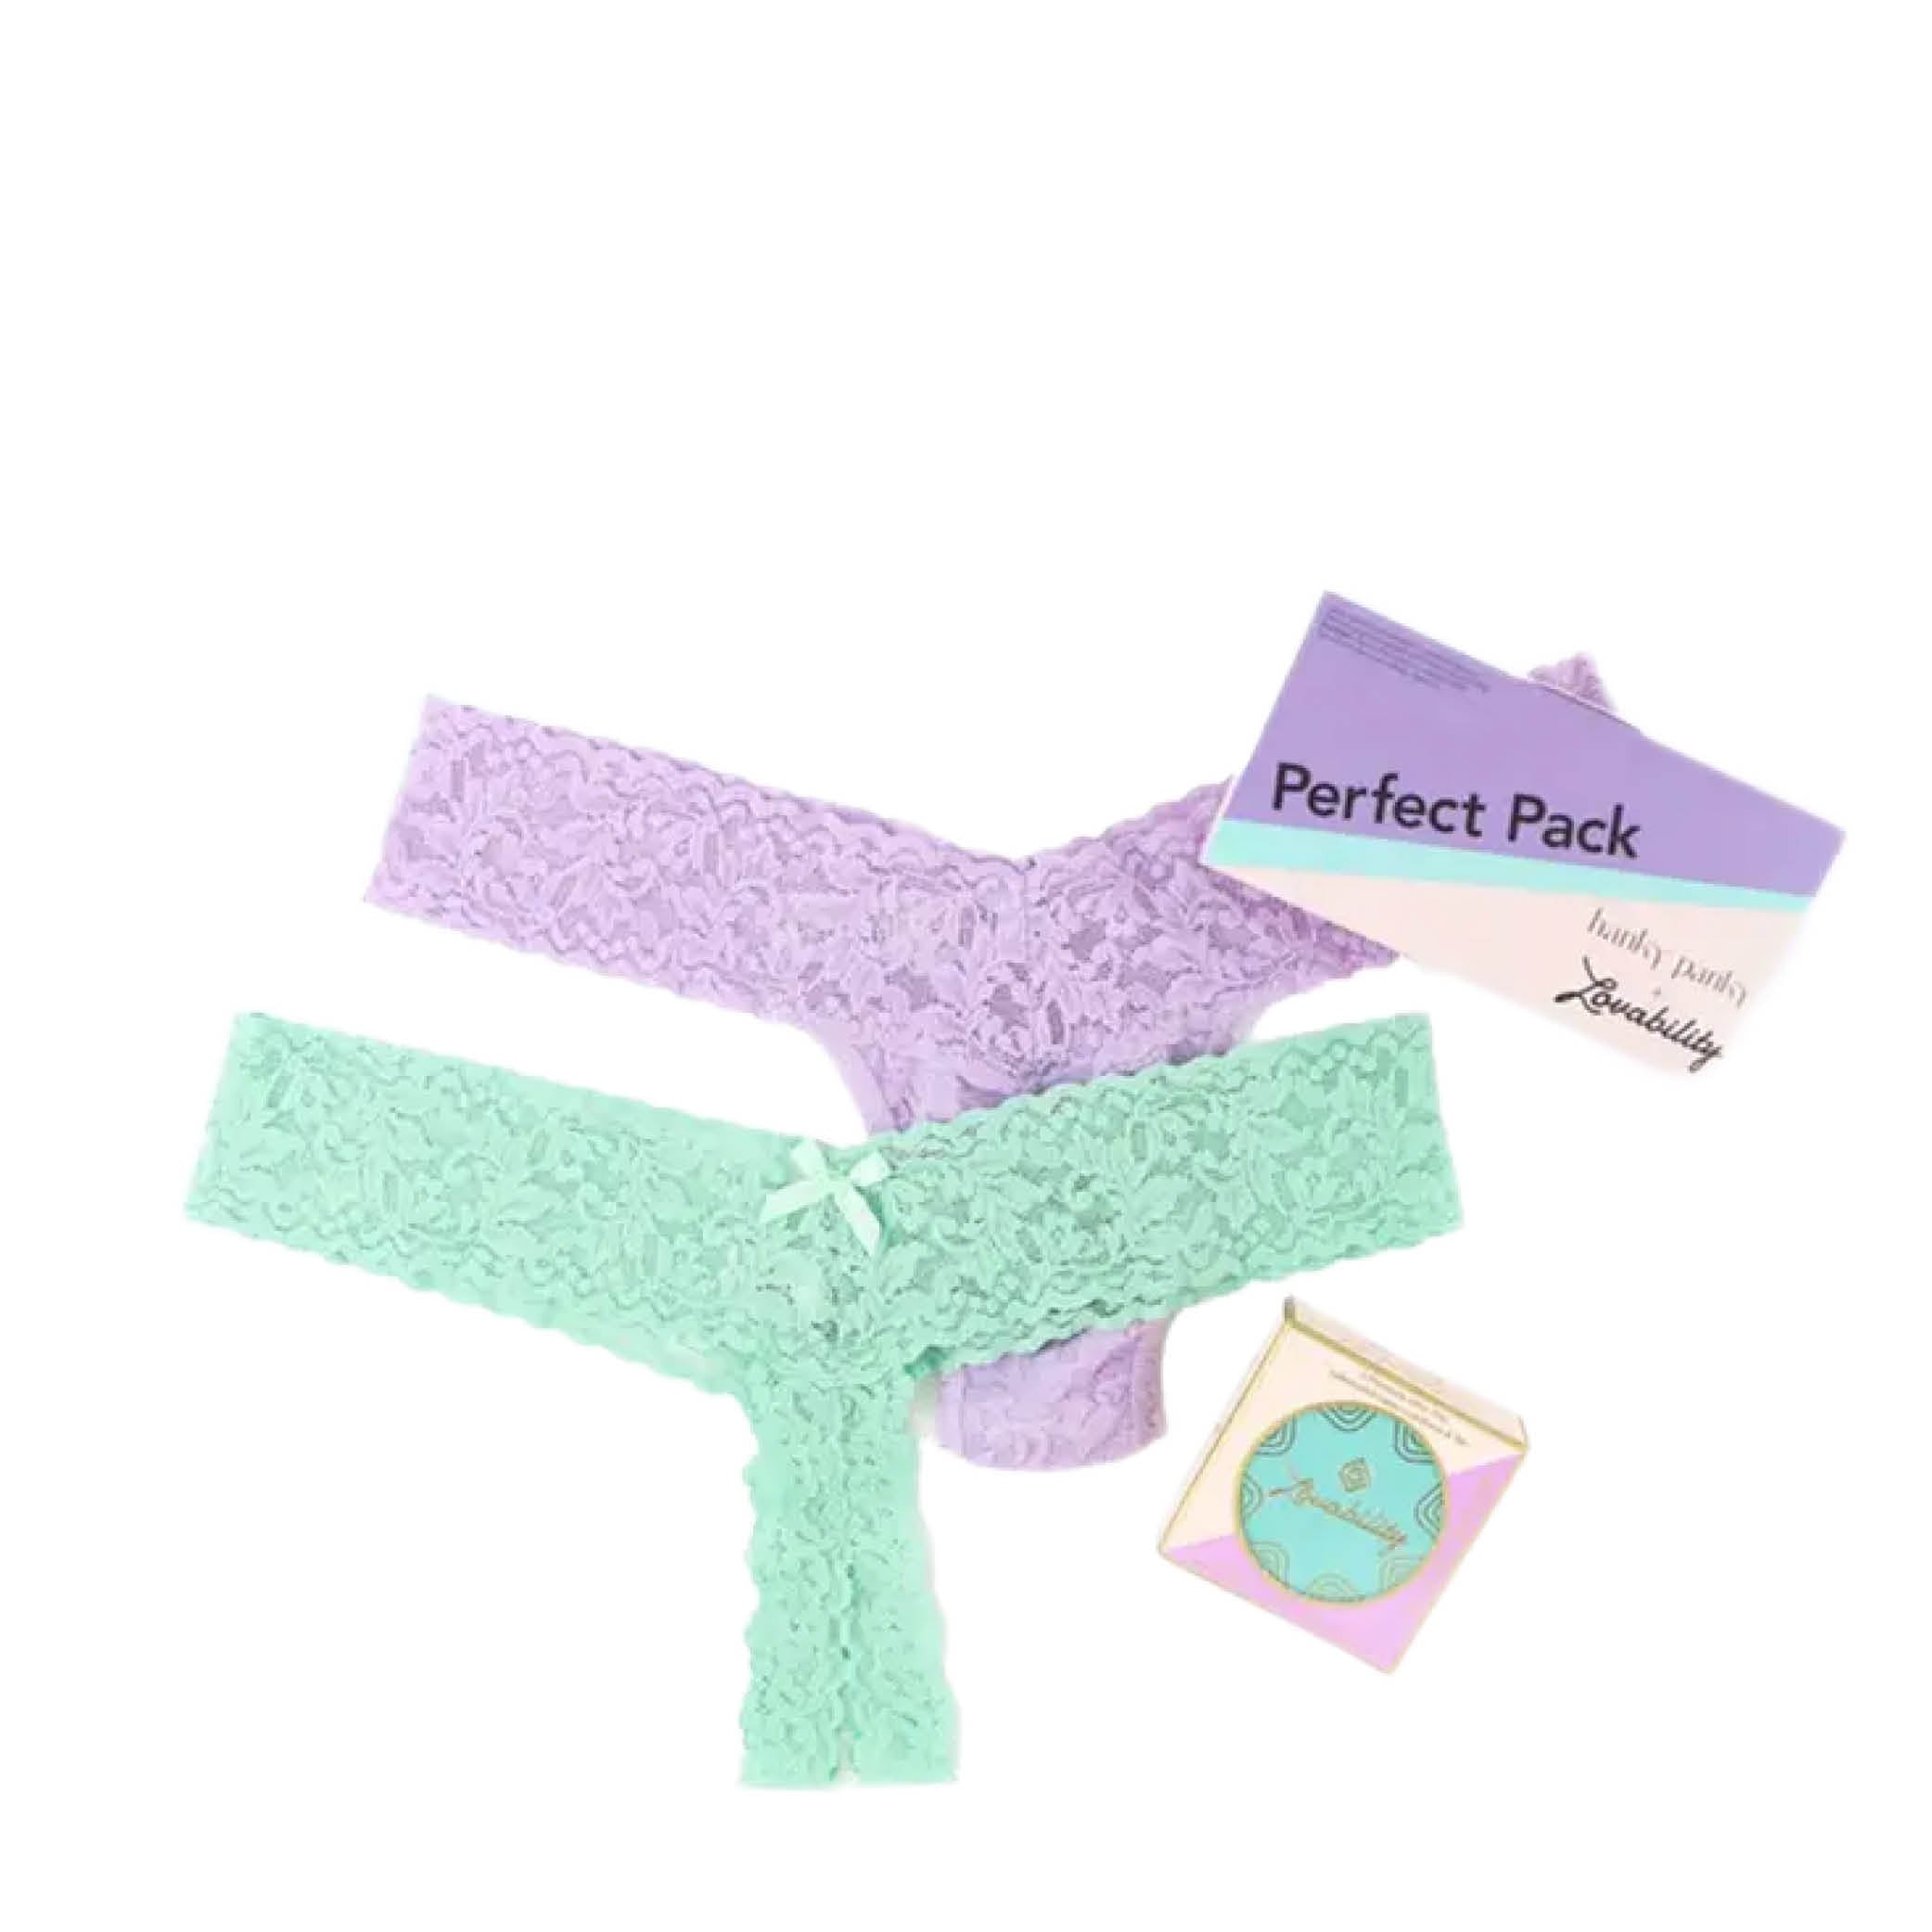 Hanky Panky x Lovability Perfect Pack